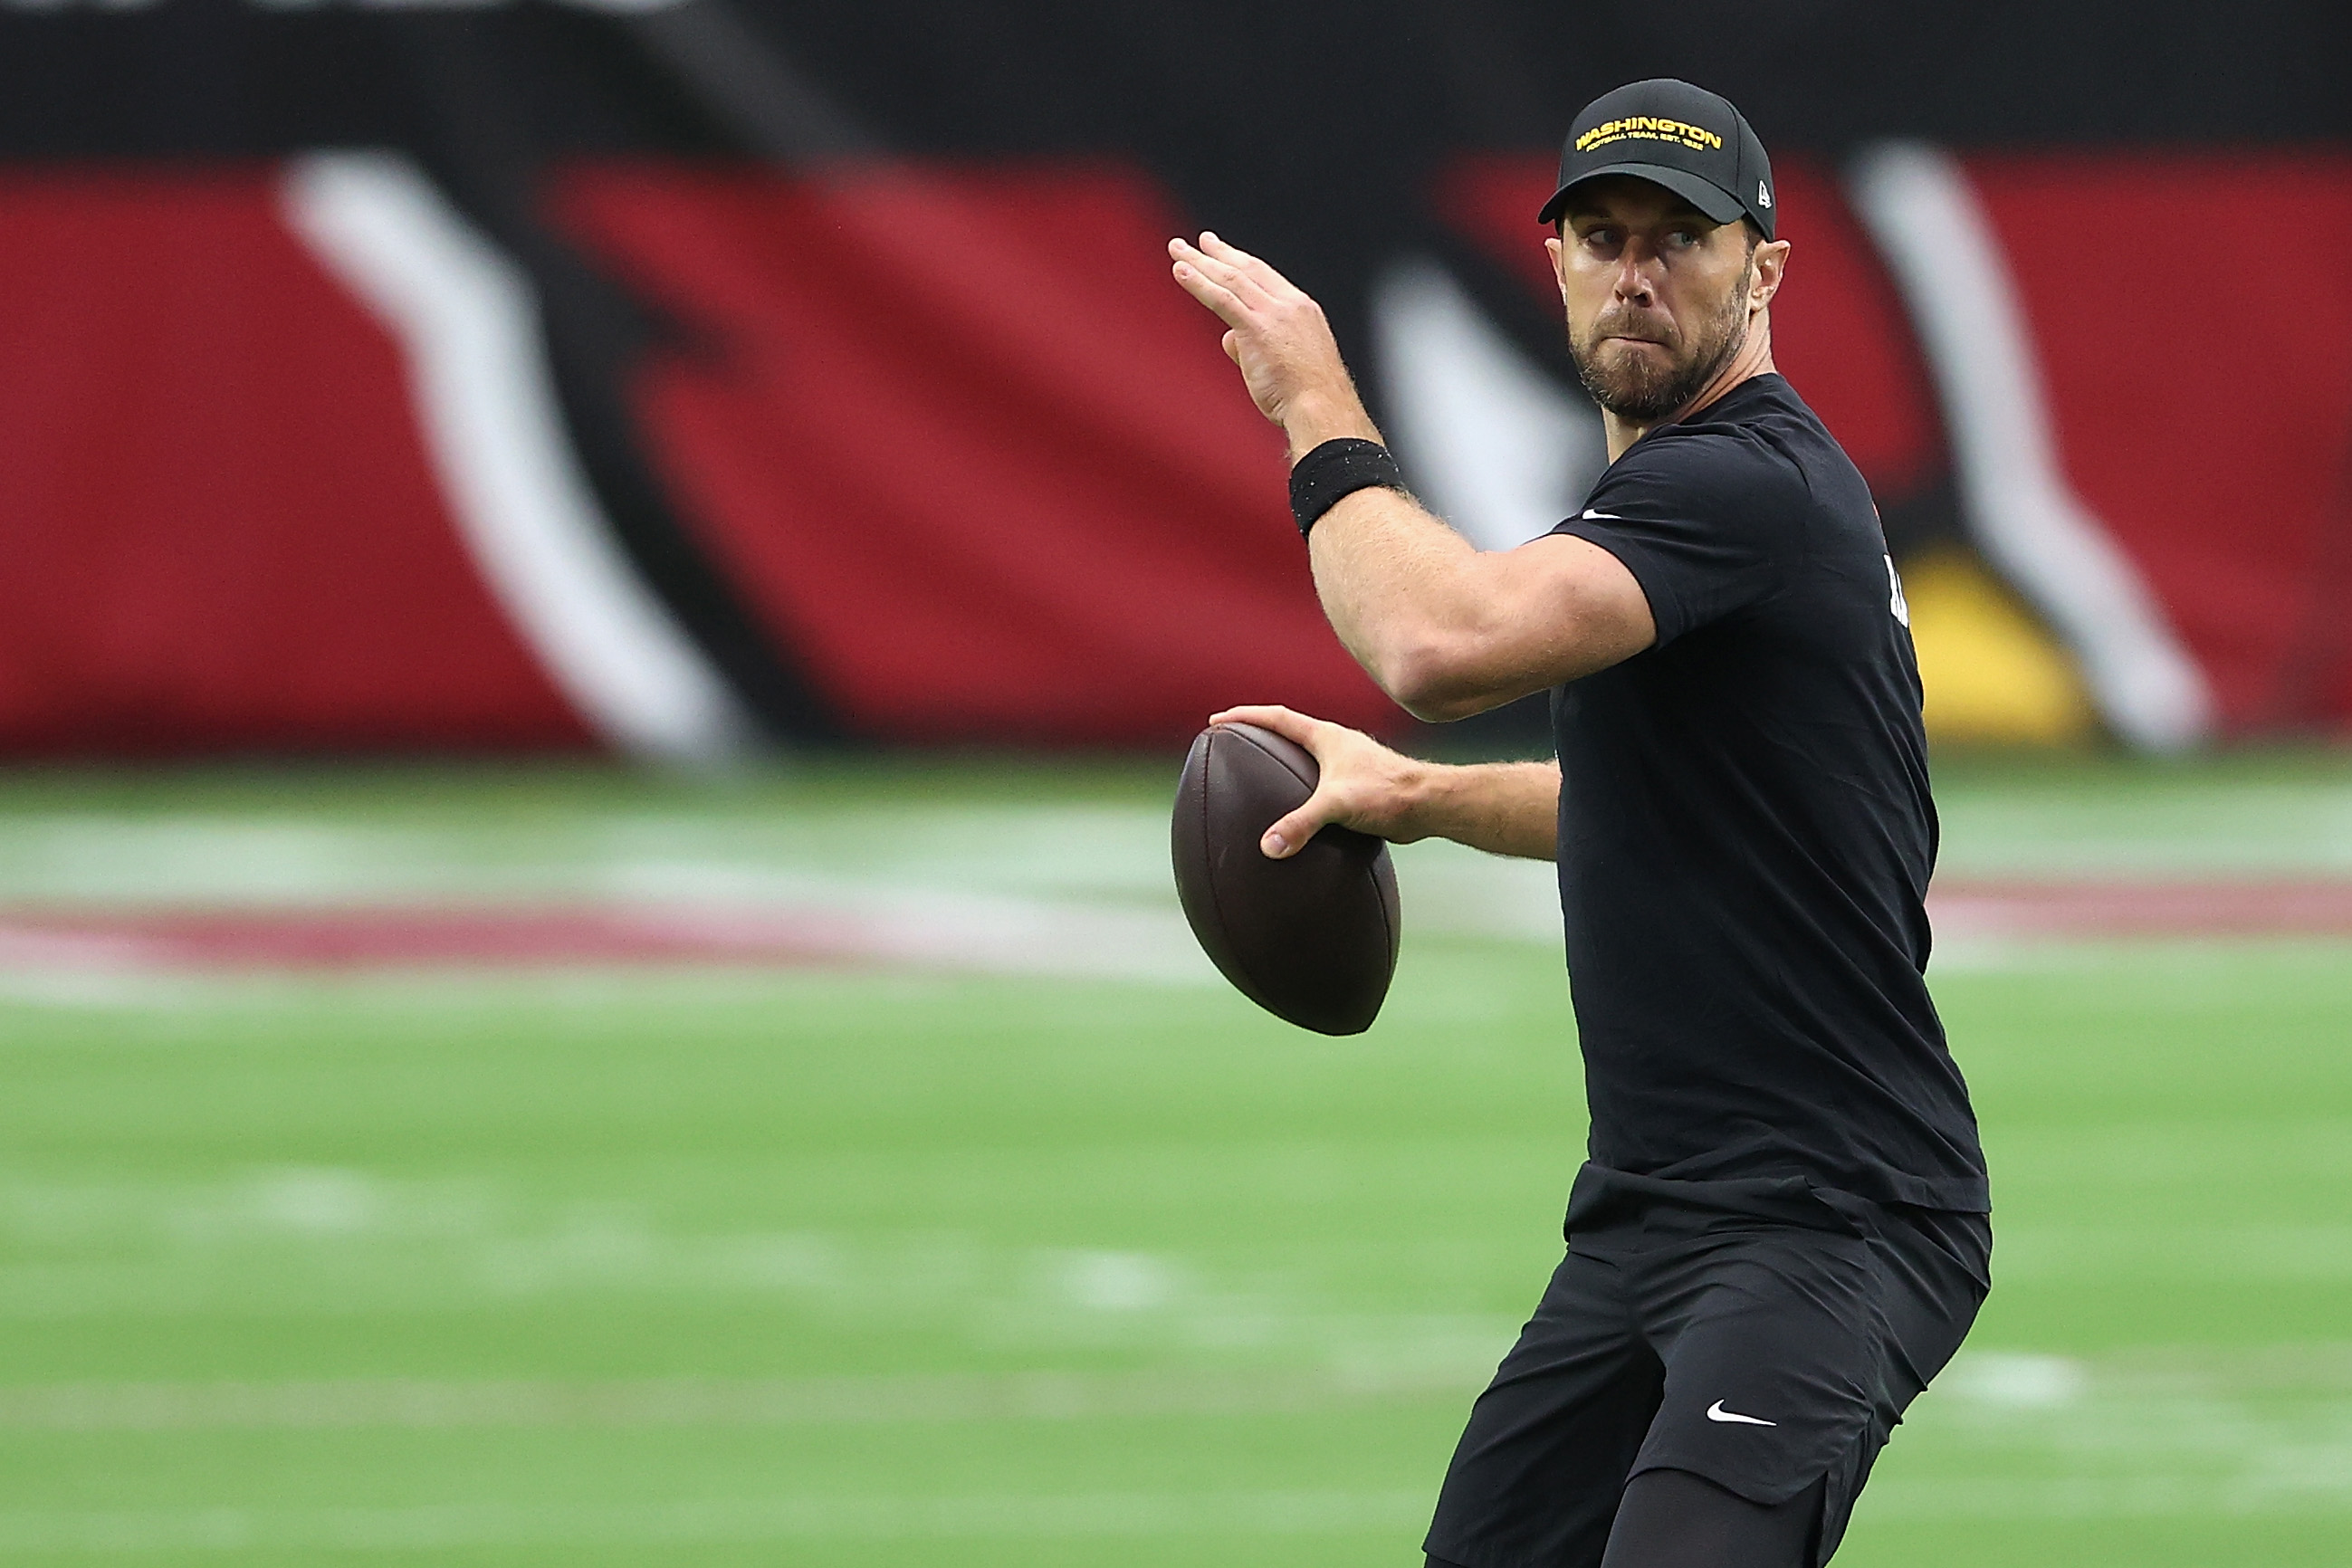 GLENDALE, ARIZONA - SEPTEMBER 20: Quarterback Alex Smith #11 of the Washington Football Team warms up before the NFL game against the Arizona Cardinals at State Farm Stadium on September 20, 2020 in Glendale, Arizona. (Photo by Christian Petersen/Getty Images)